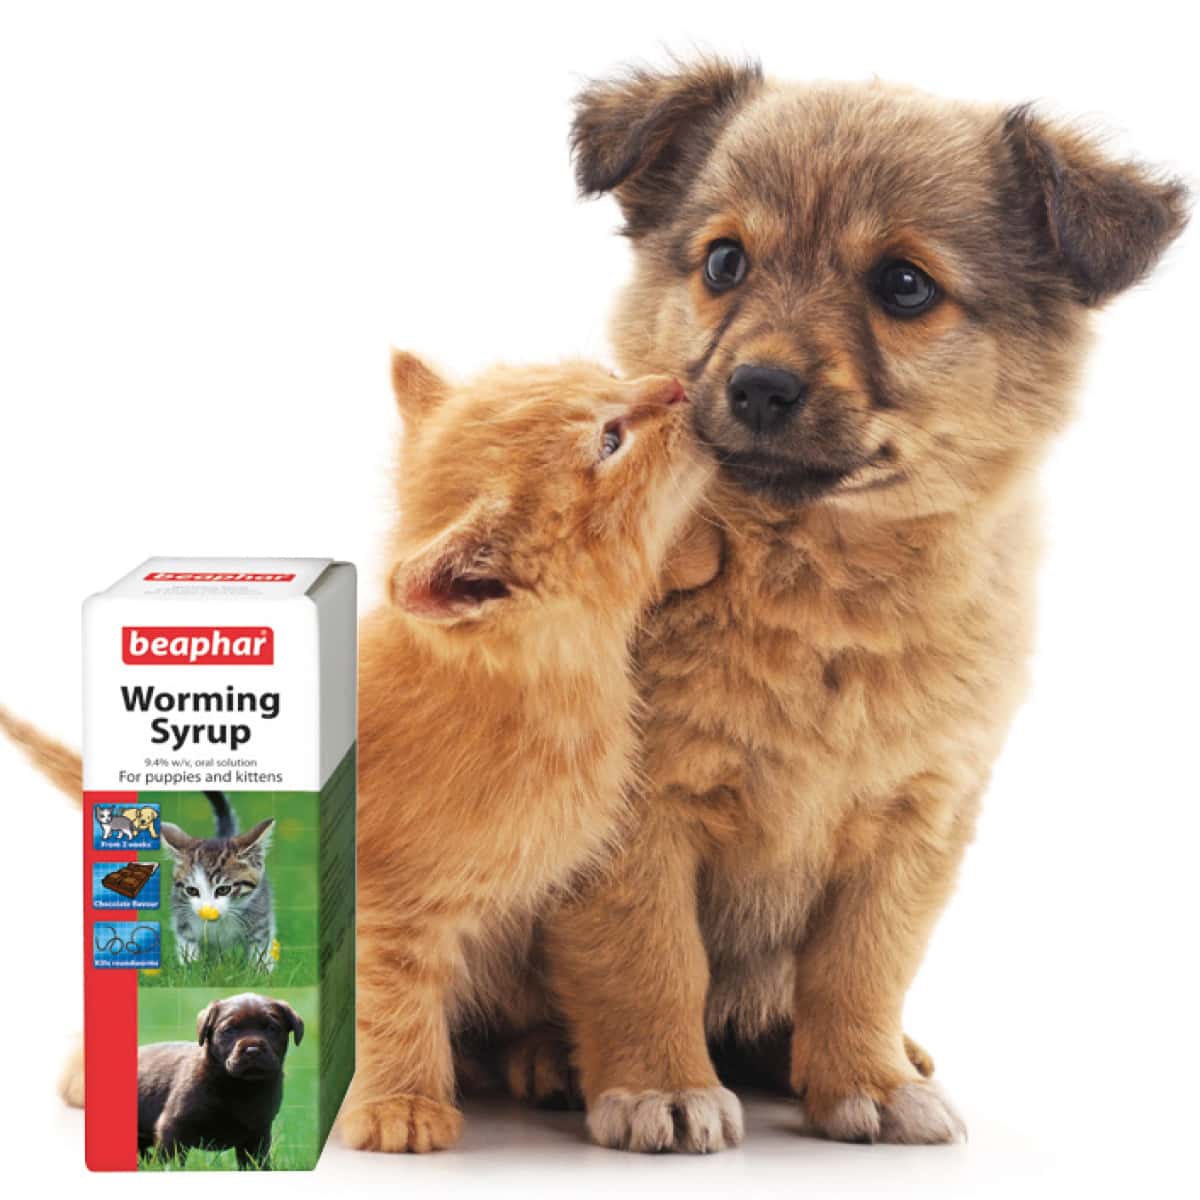 Beaphar Worming Syrup for Cats & Dogs 45ml Main Image